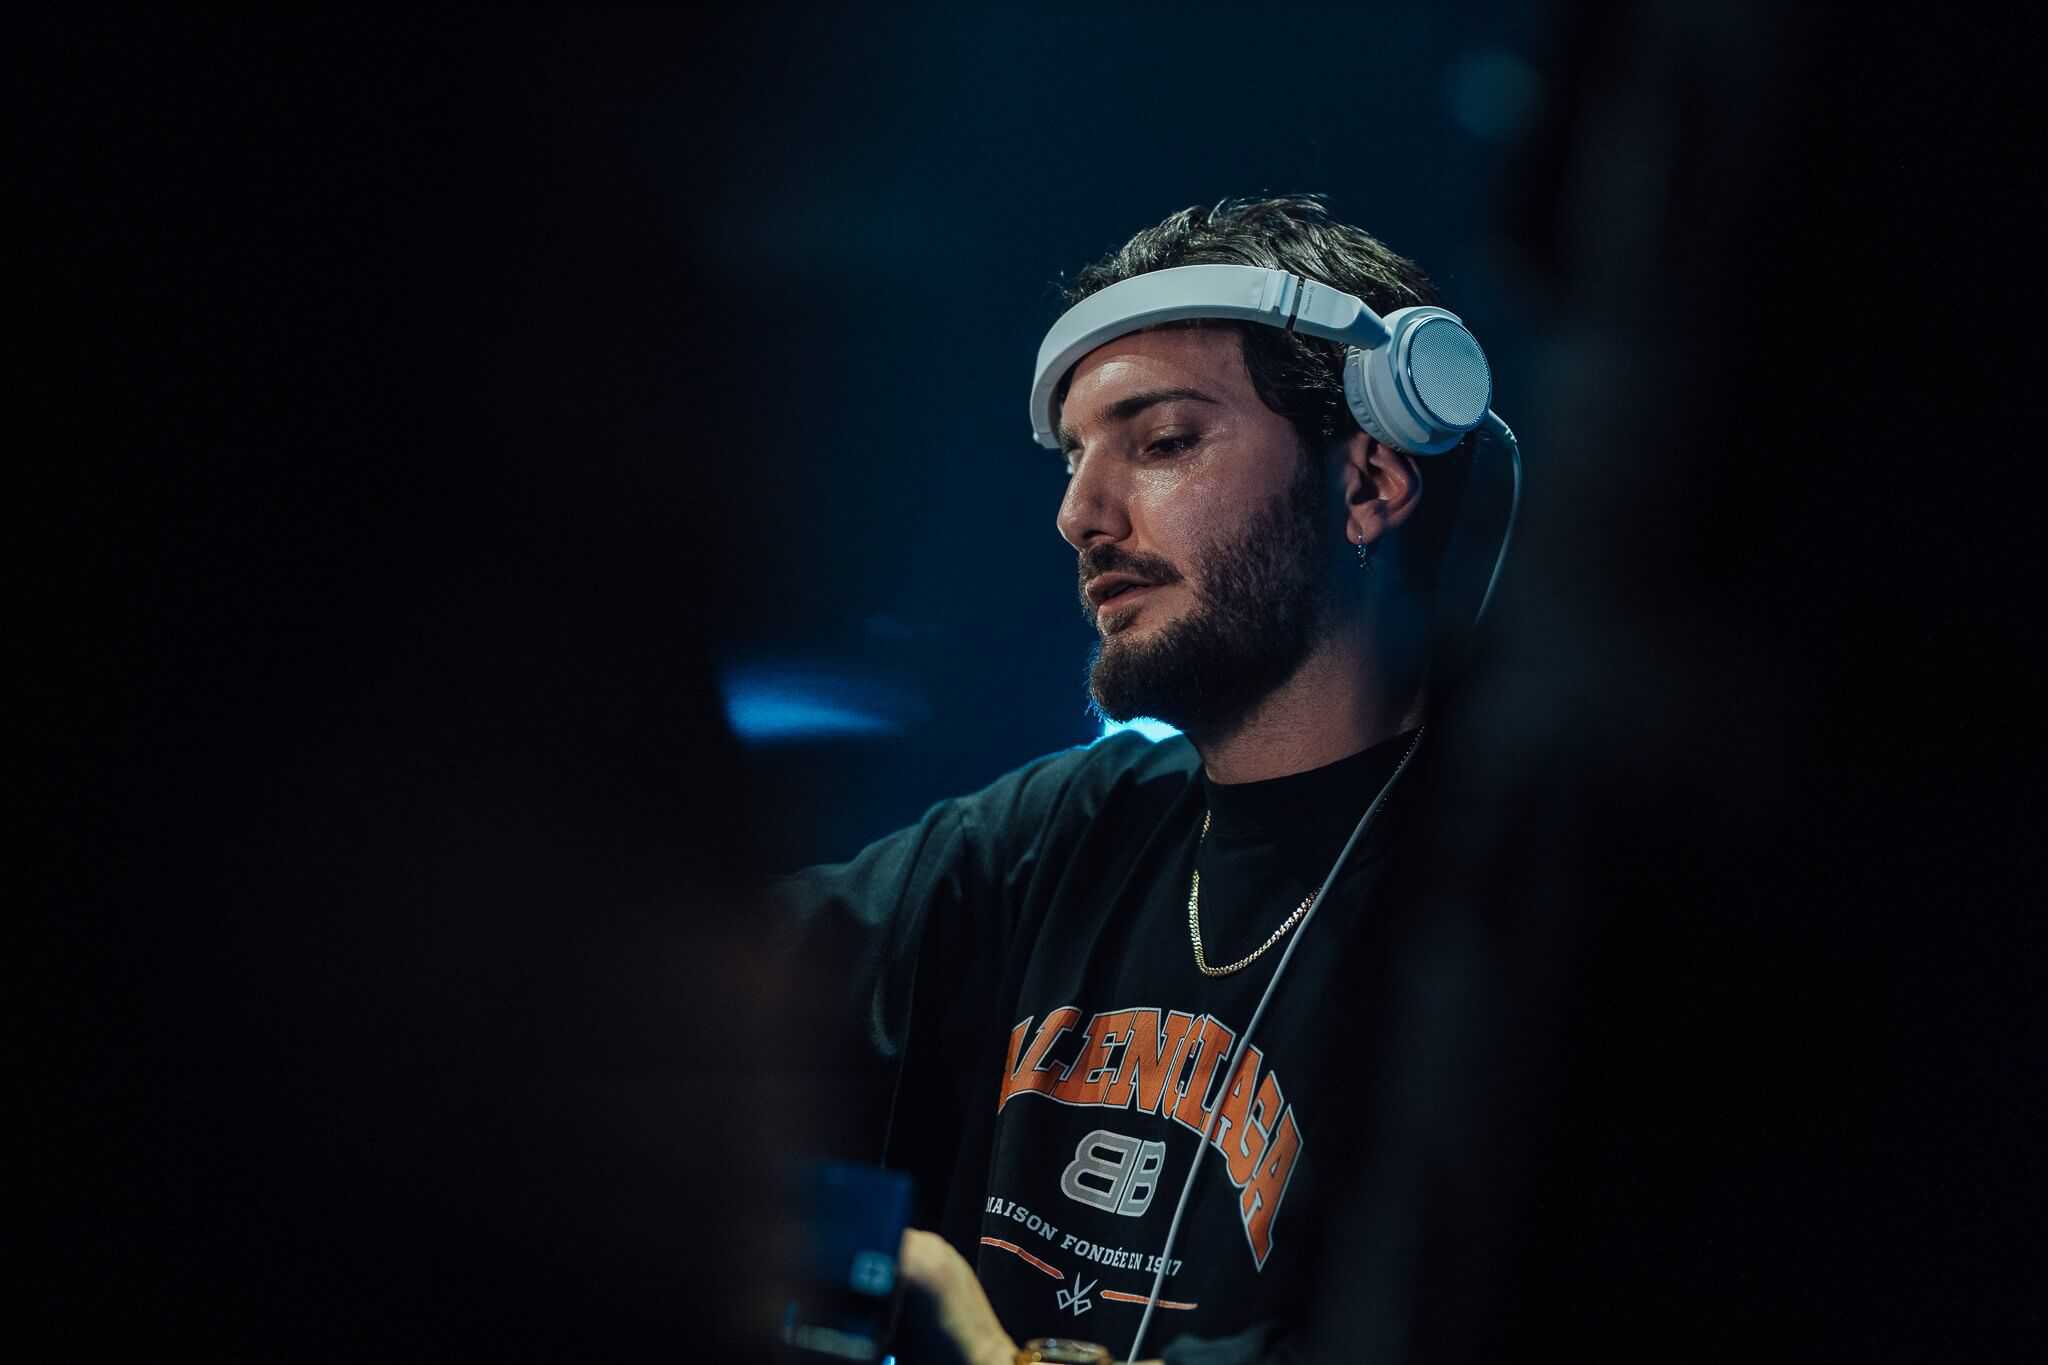 Alesso stuns with Eclipse set at Tomorrowland 2022 Weekend 2: Watch